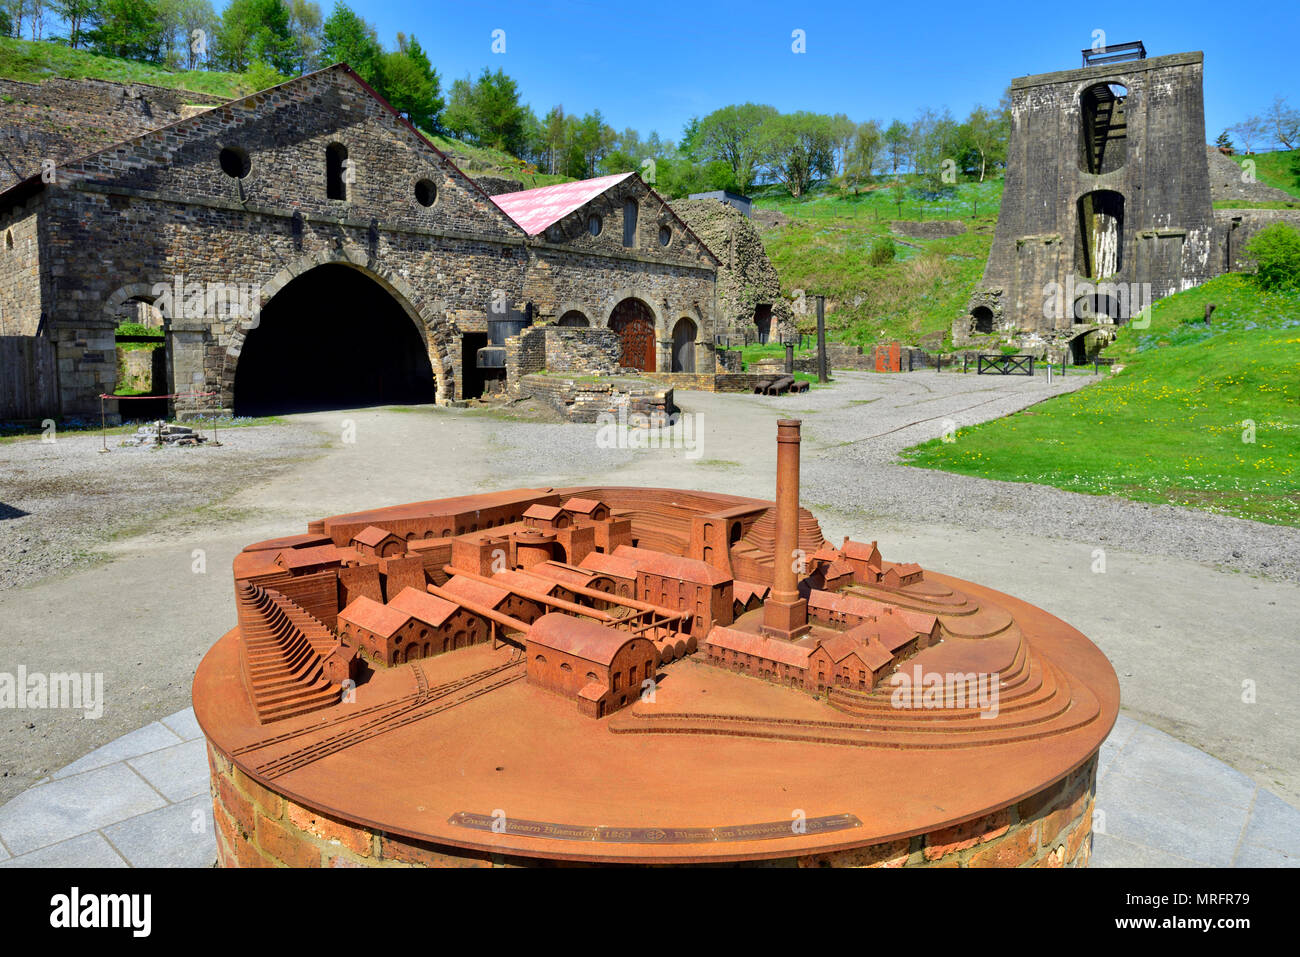 Blaenavon Ironworks blast furnace complex and model of former industrial site now a National museum, South Wales Valleys, UK  The ironworks was of cru Stock Photo